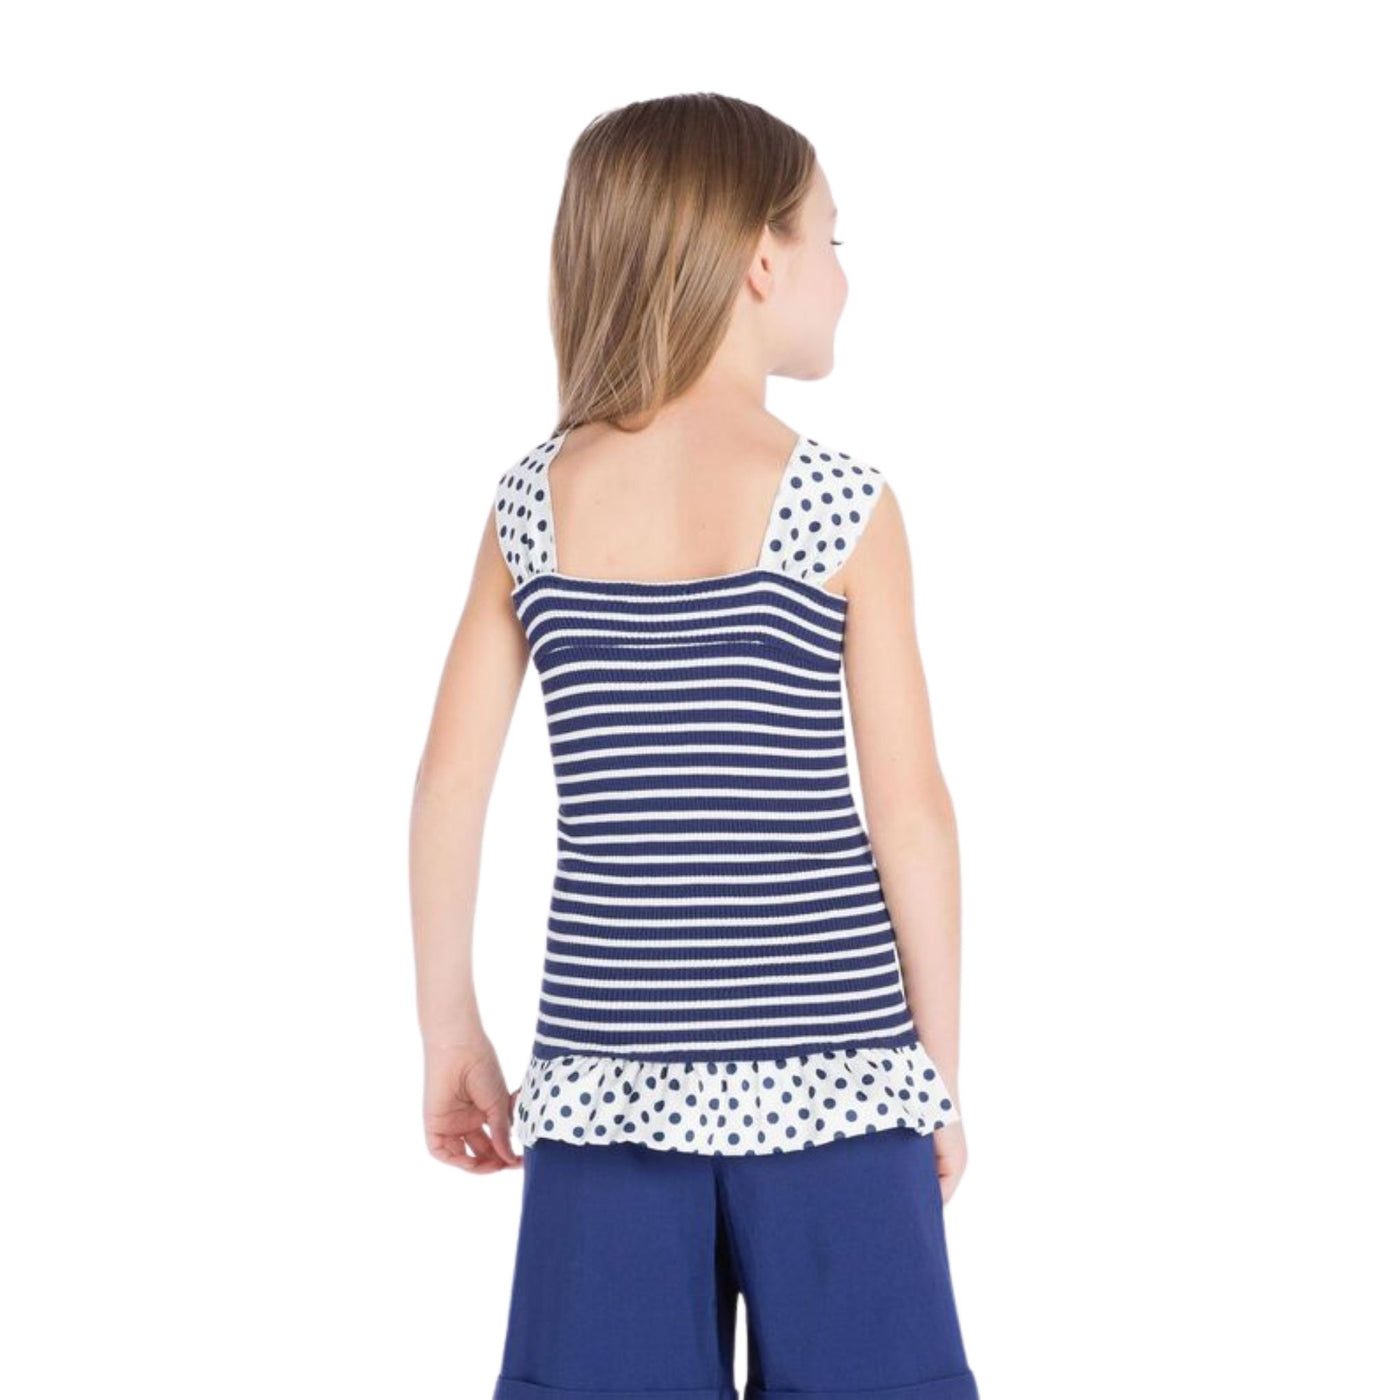 Striped girl top with polka dot bow